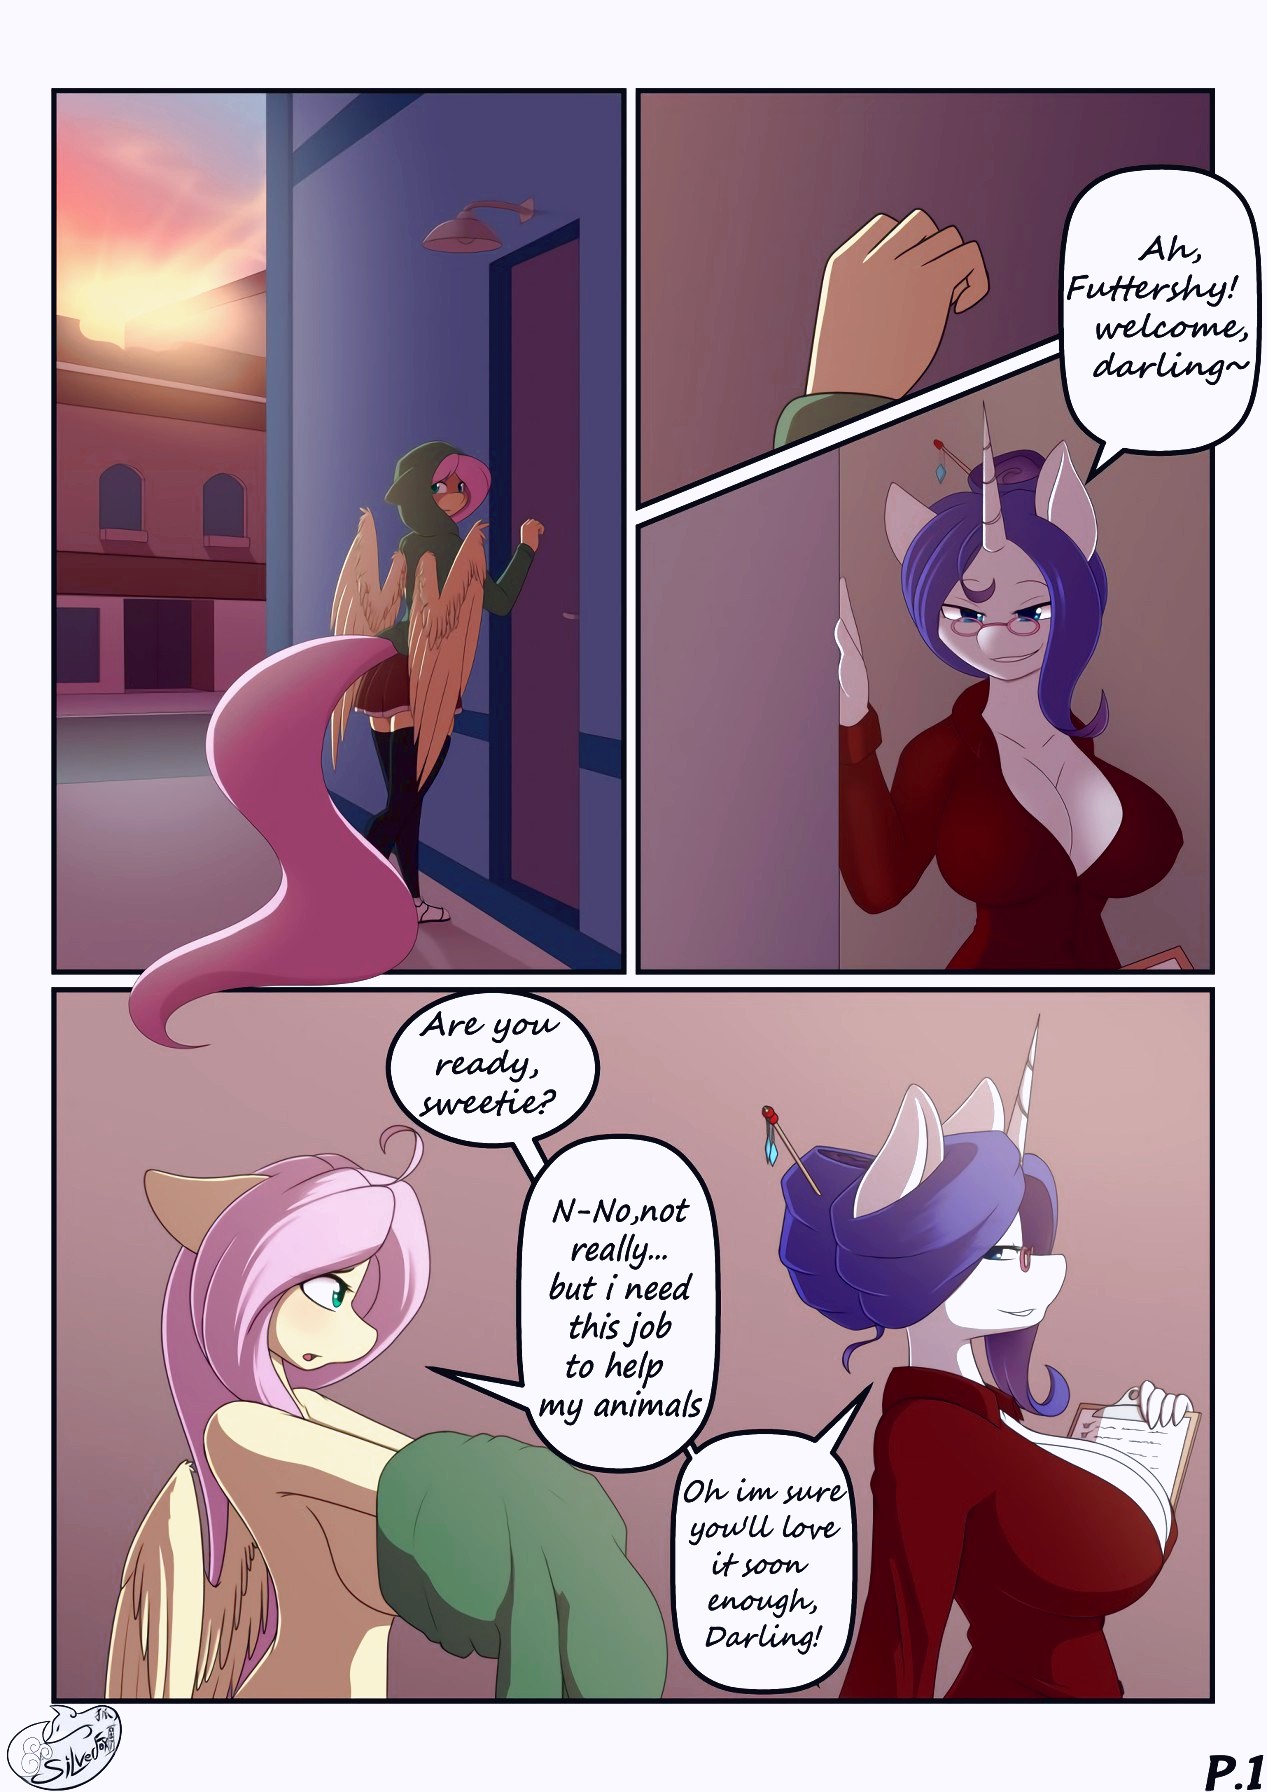 Fluttershy's Show porn comic page 01 on category My Little Pony